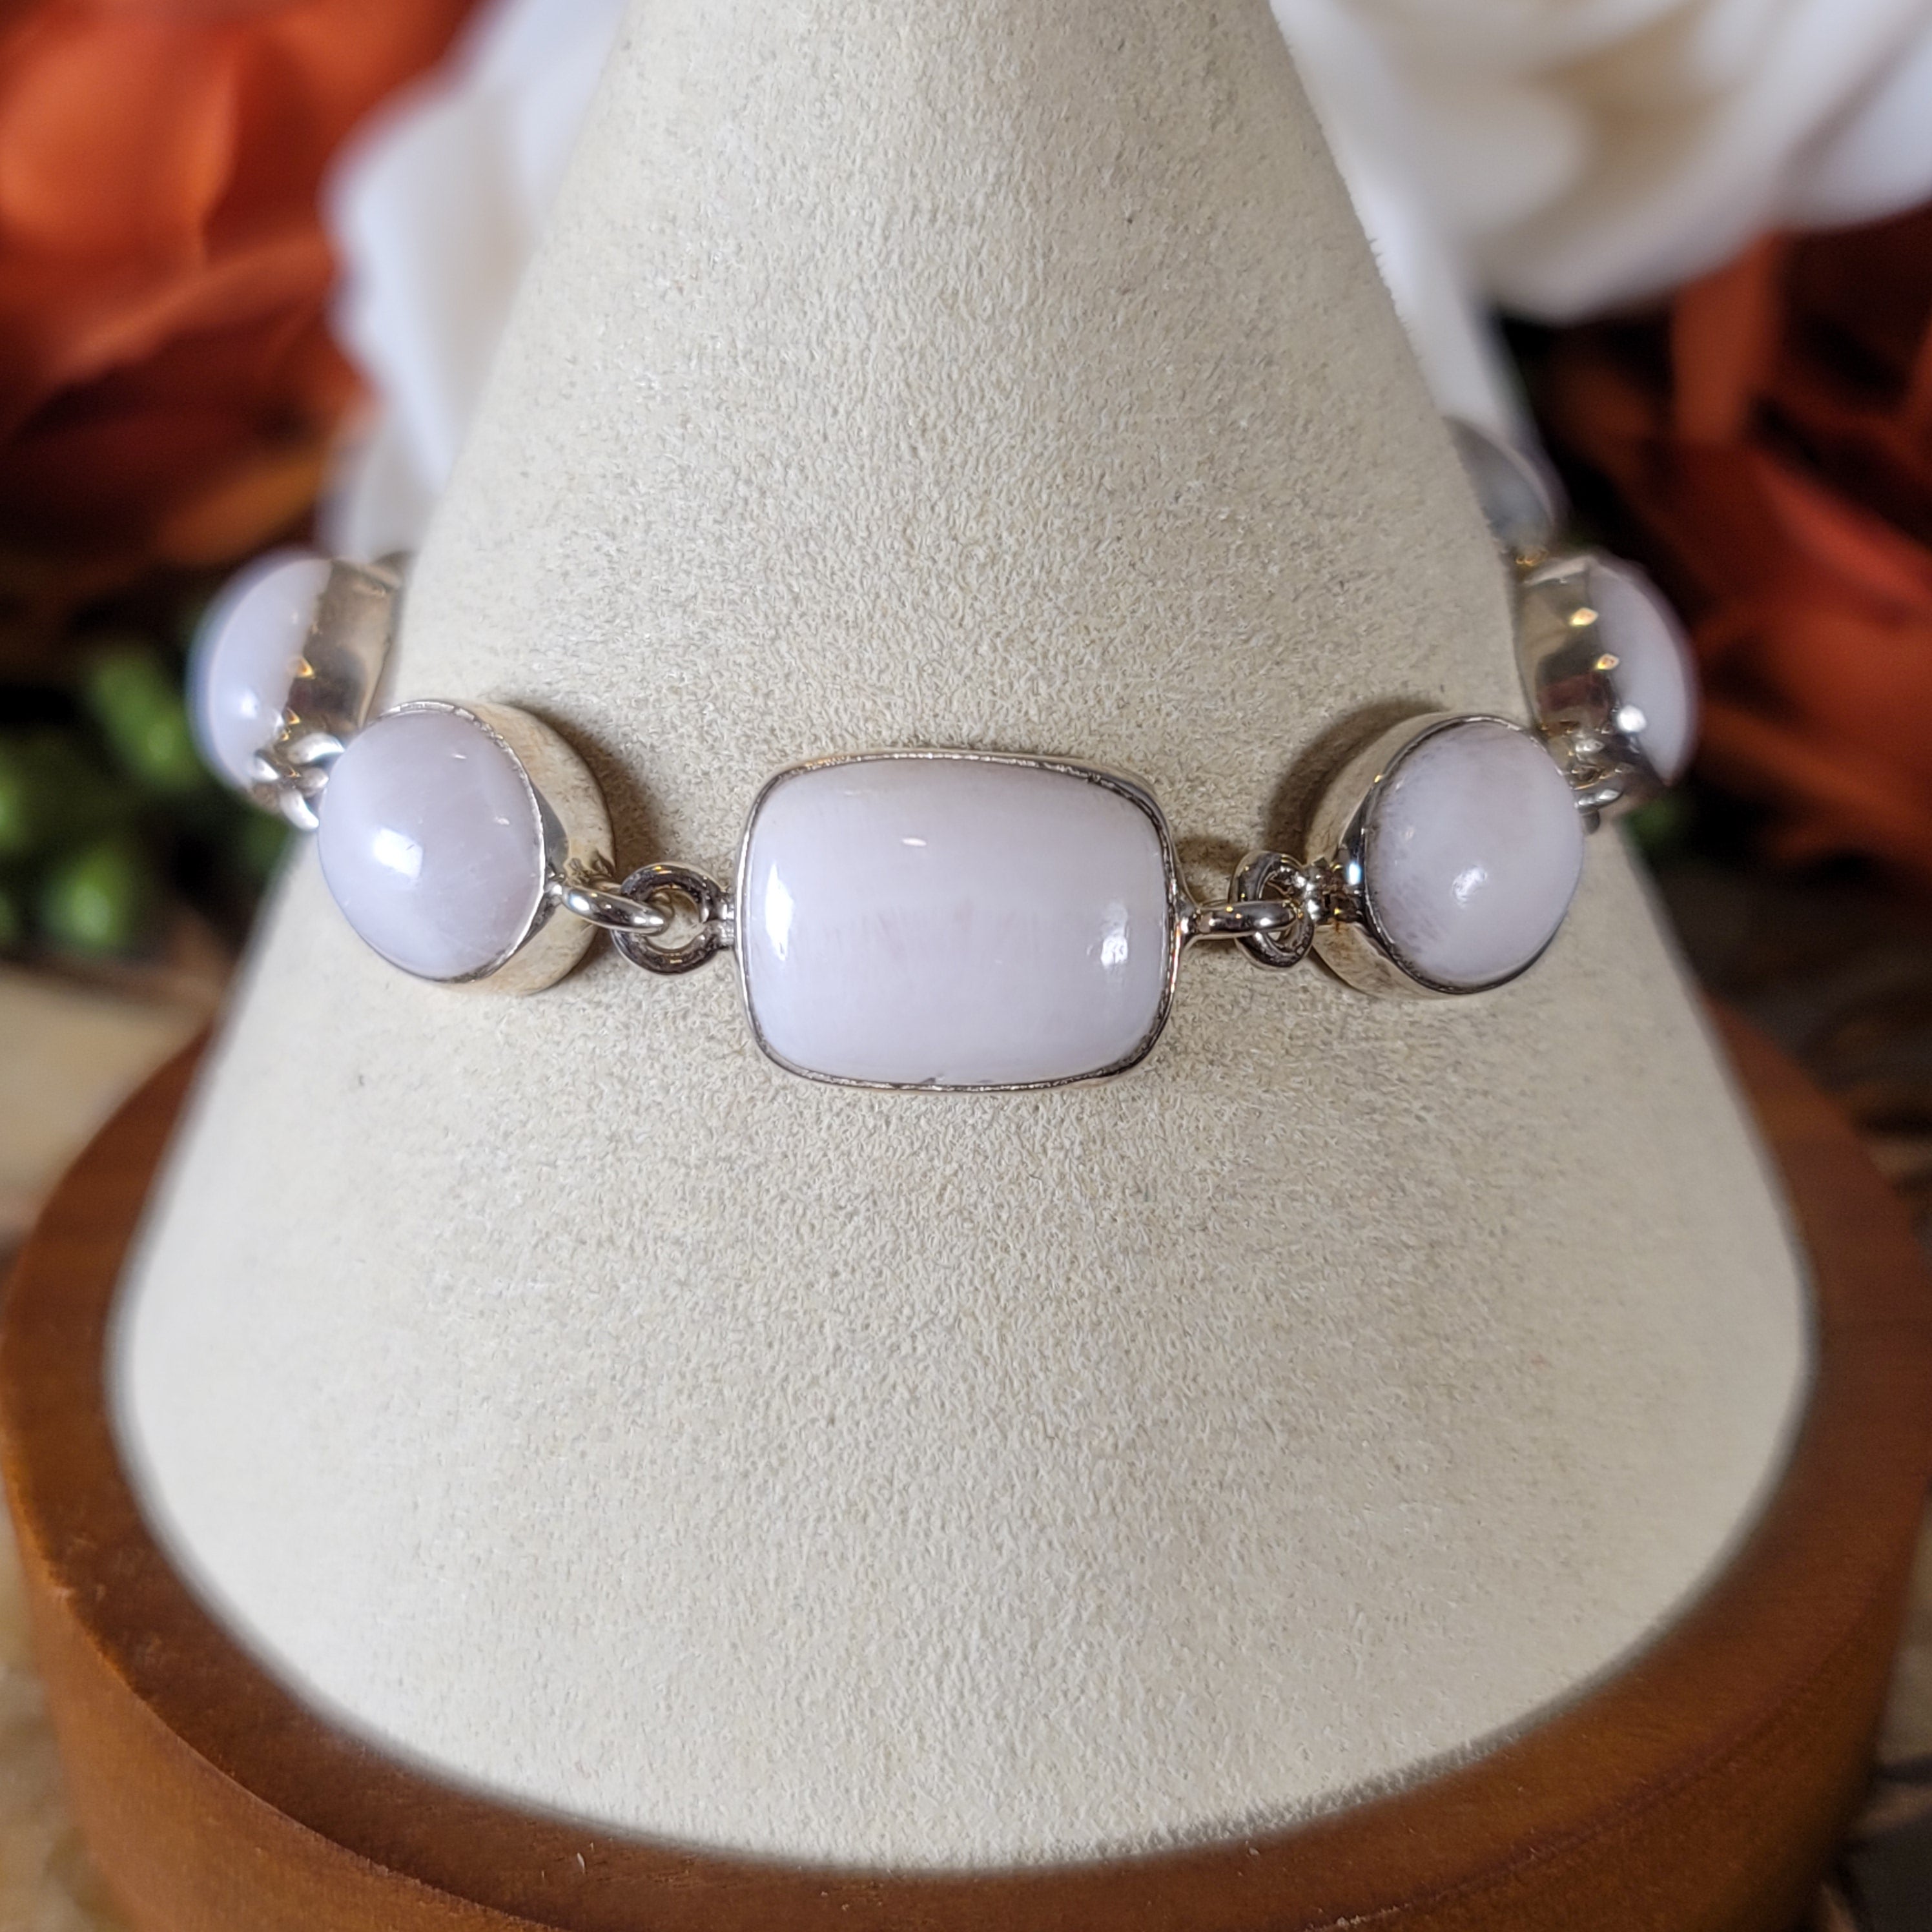 Pink Calcite Bracelet .925 Silver for Compassion, Conflict Resolution and Emotional Healing